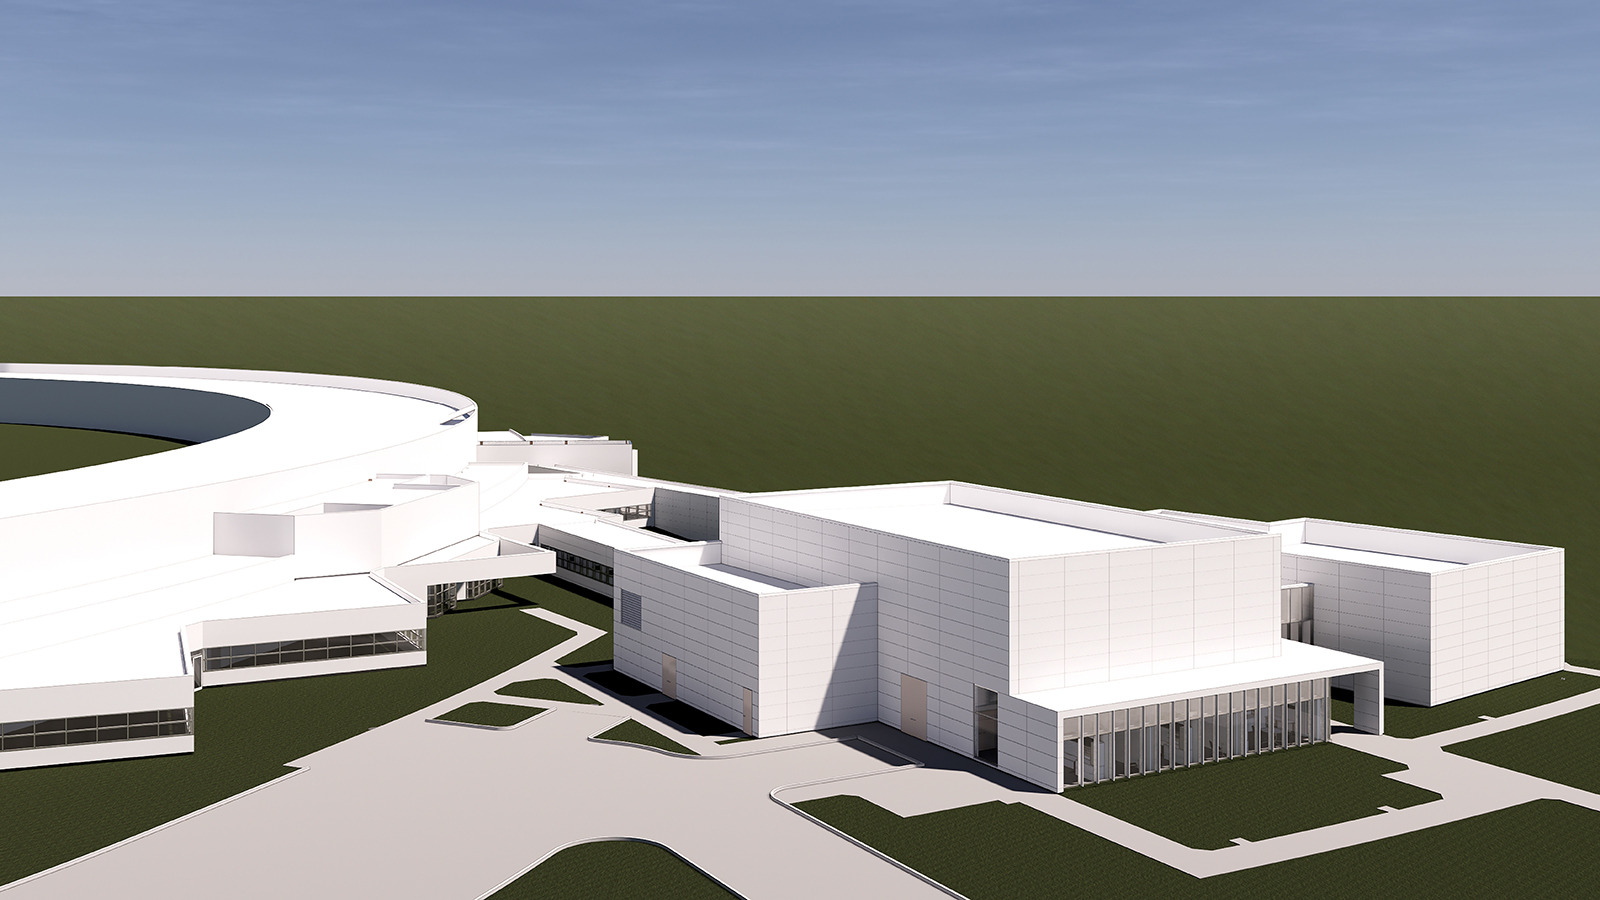 Artist’s rendition of the Long Beamline Building. The new facility will be built as part of a major upgrade of the APS and will house two new beamlines. (Image by HDR Architects.)